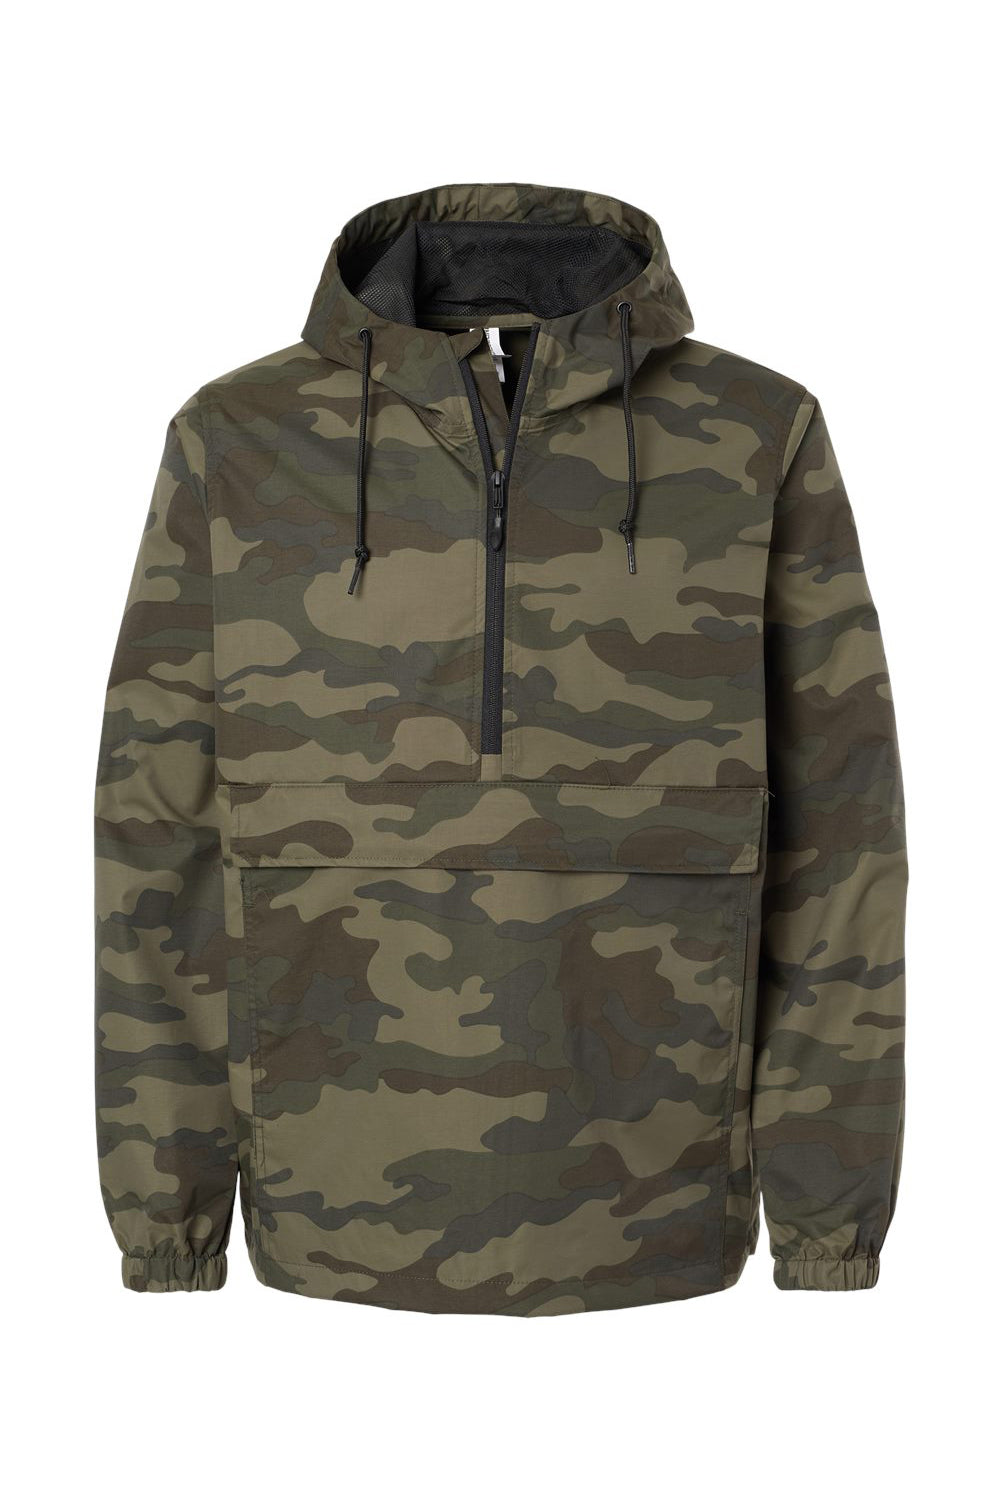 Independent Trading Co. EXP94NAW Mens Nylon Hooded Anorak Jacket Forest Green Camo Flat Front